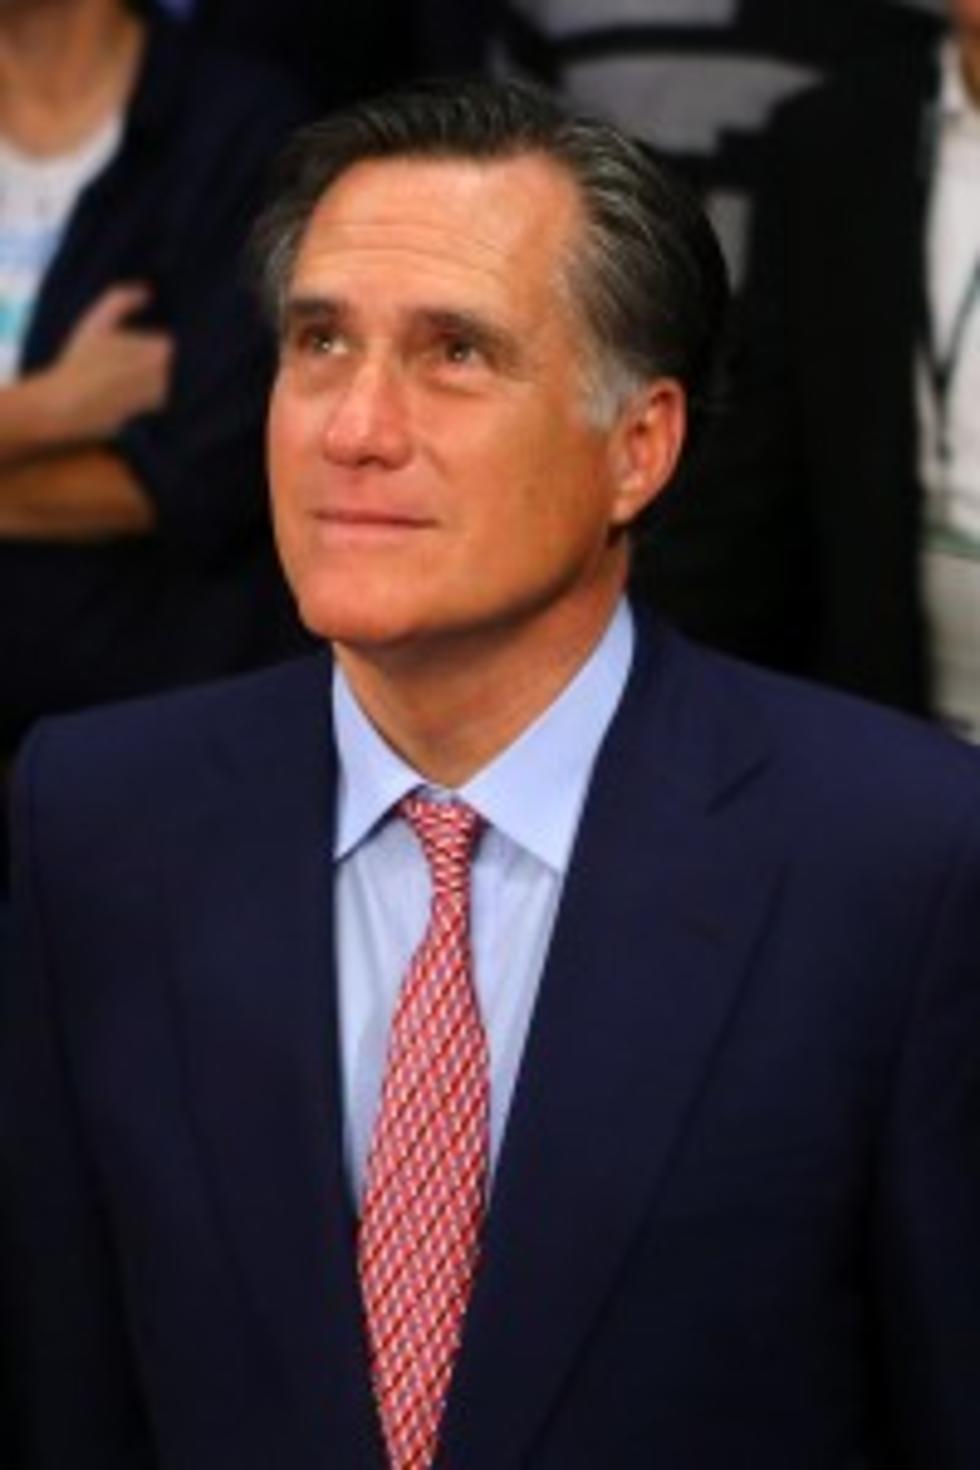 Romney in Idaho Supporting Candidates